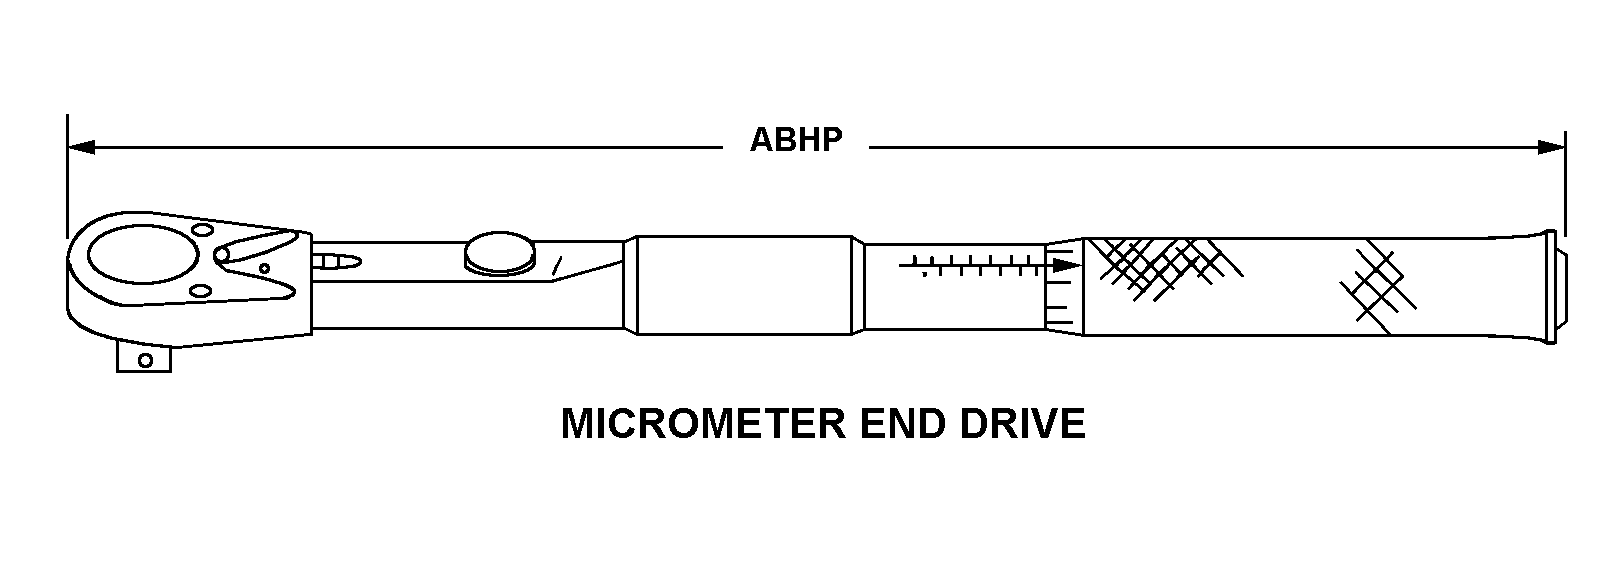 MICROMETER END DRIVE style nsn 5120-01-356-0743